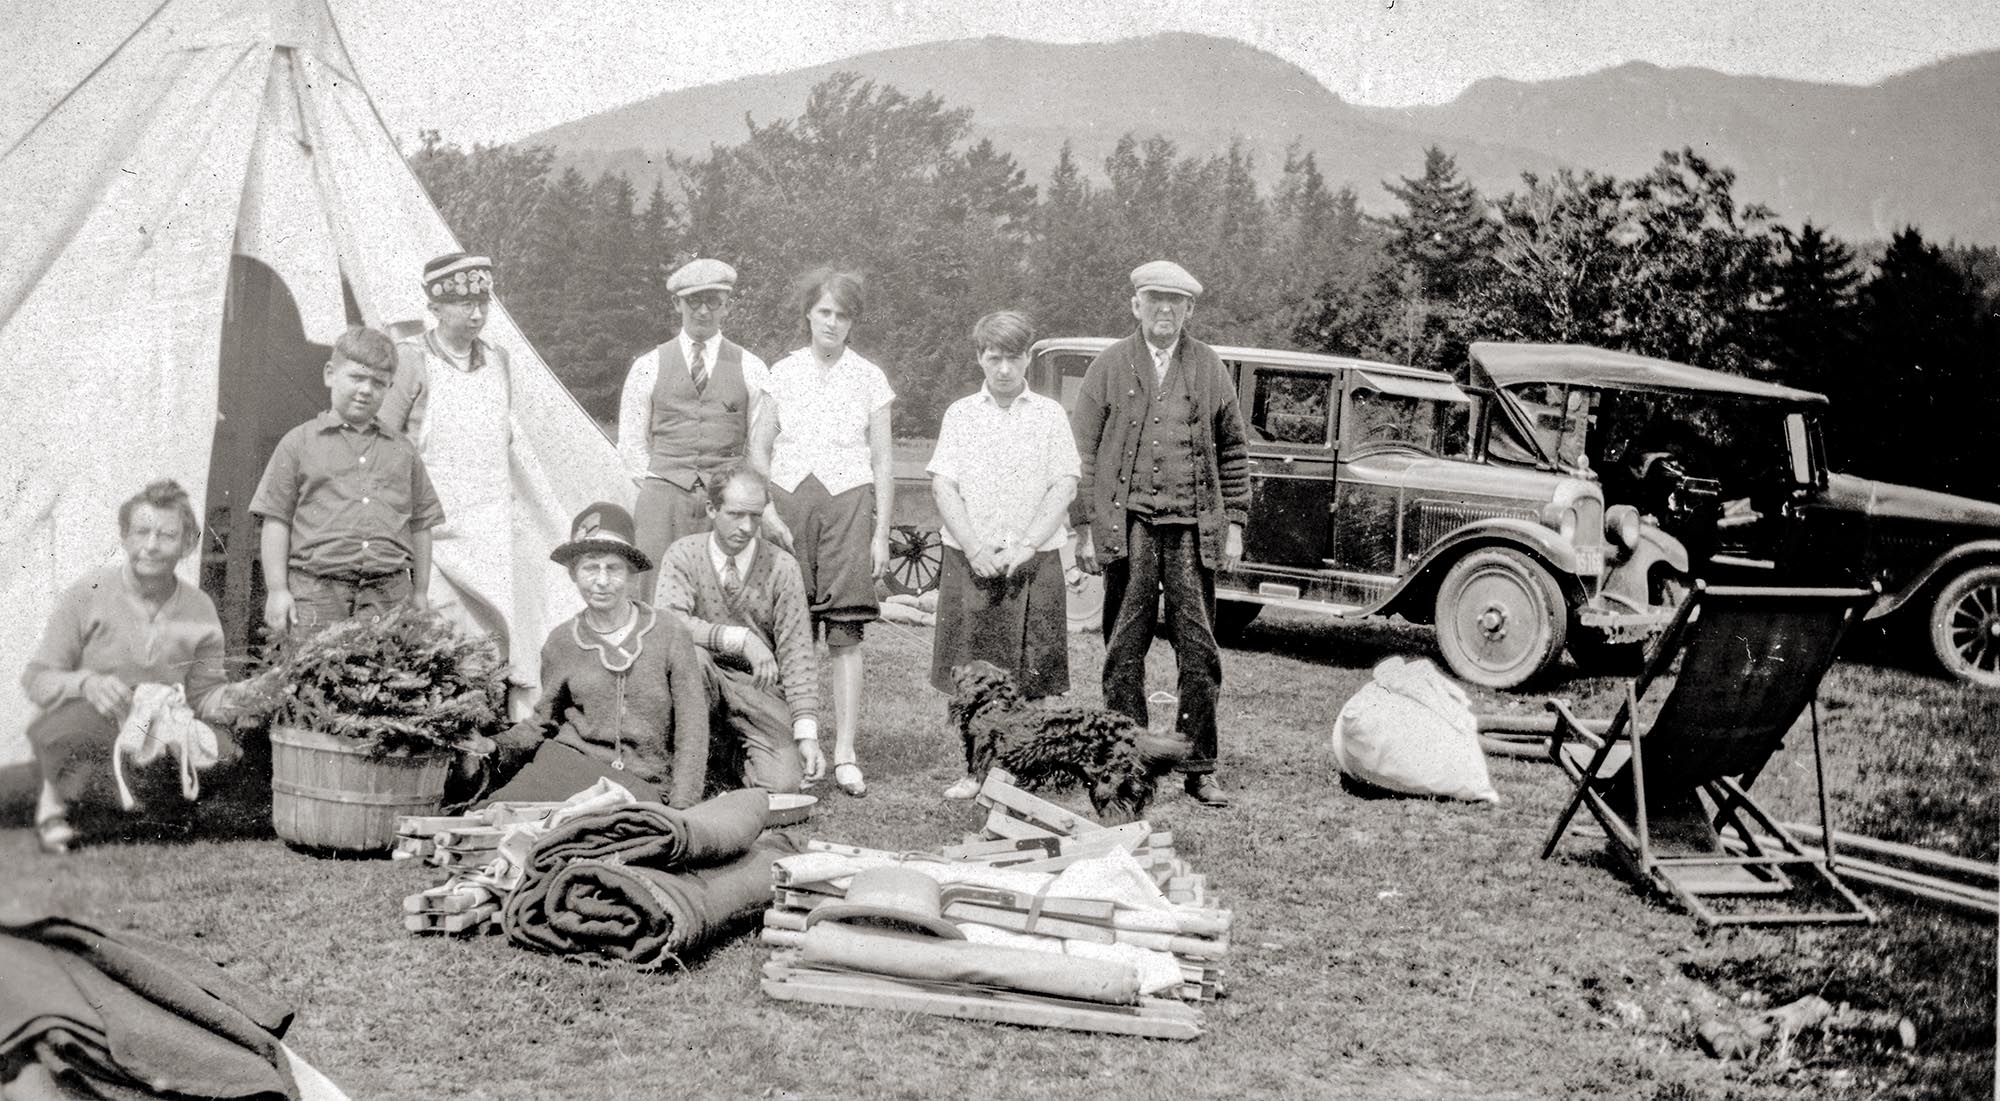 Found photos of a family from New Hampshire, 1929-1935, out on several automotive camping trips around Mt. Chocorua, Chocorua Lake, Hampton Beach and Rye areas of New Hampshire. This trip is dated 1932.